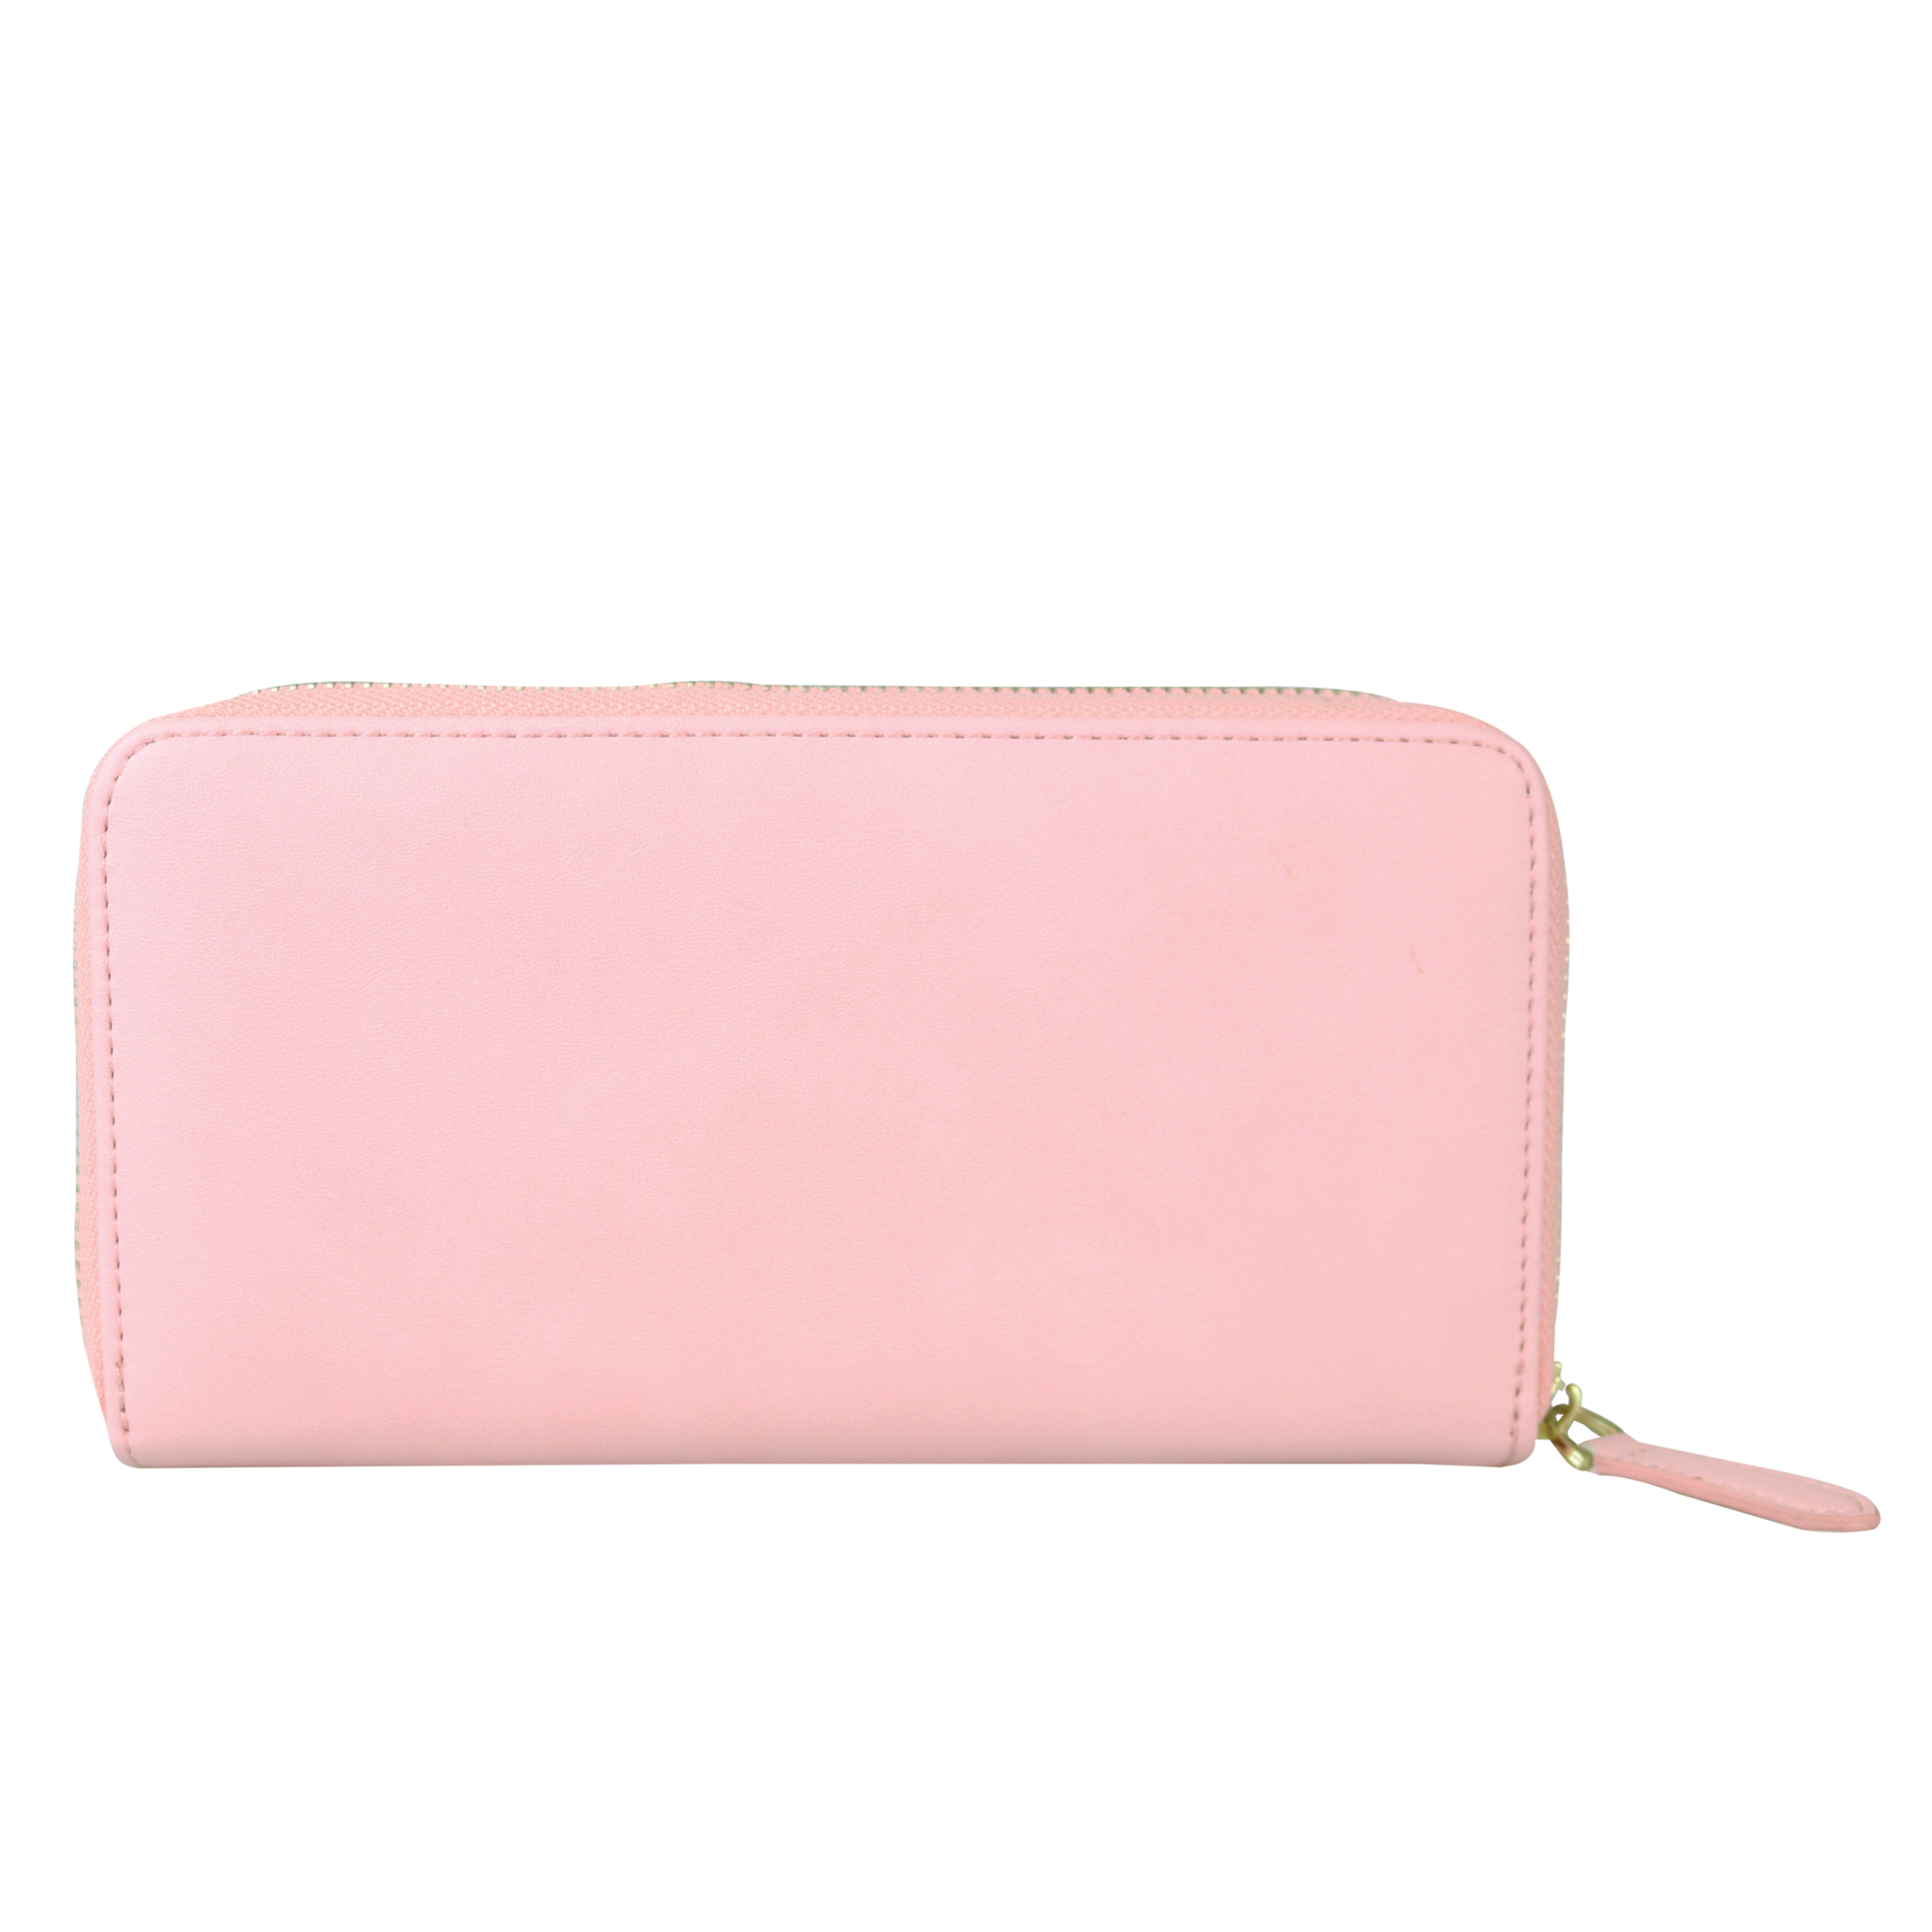 Light pink wallet | Wicked Sista | Cosmetic Bags, Jewellery, Hair Accessories, Watches & Scarves